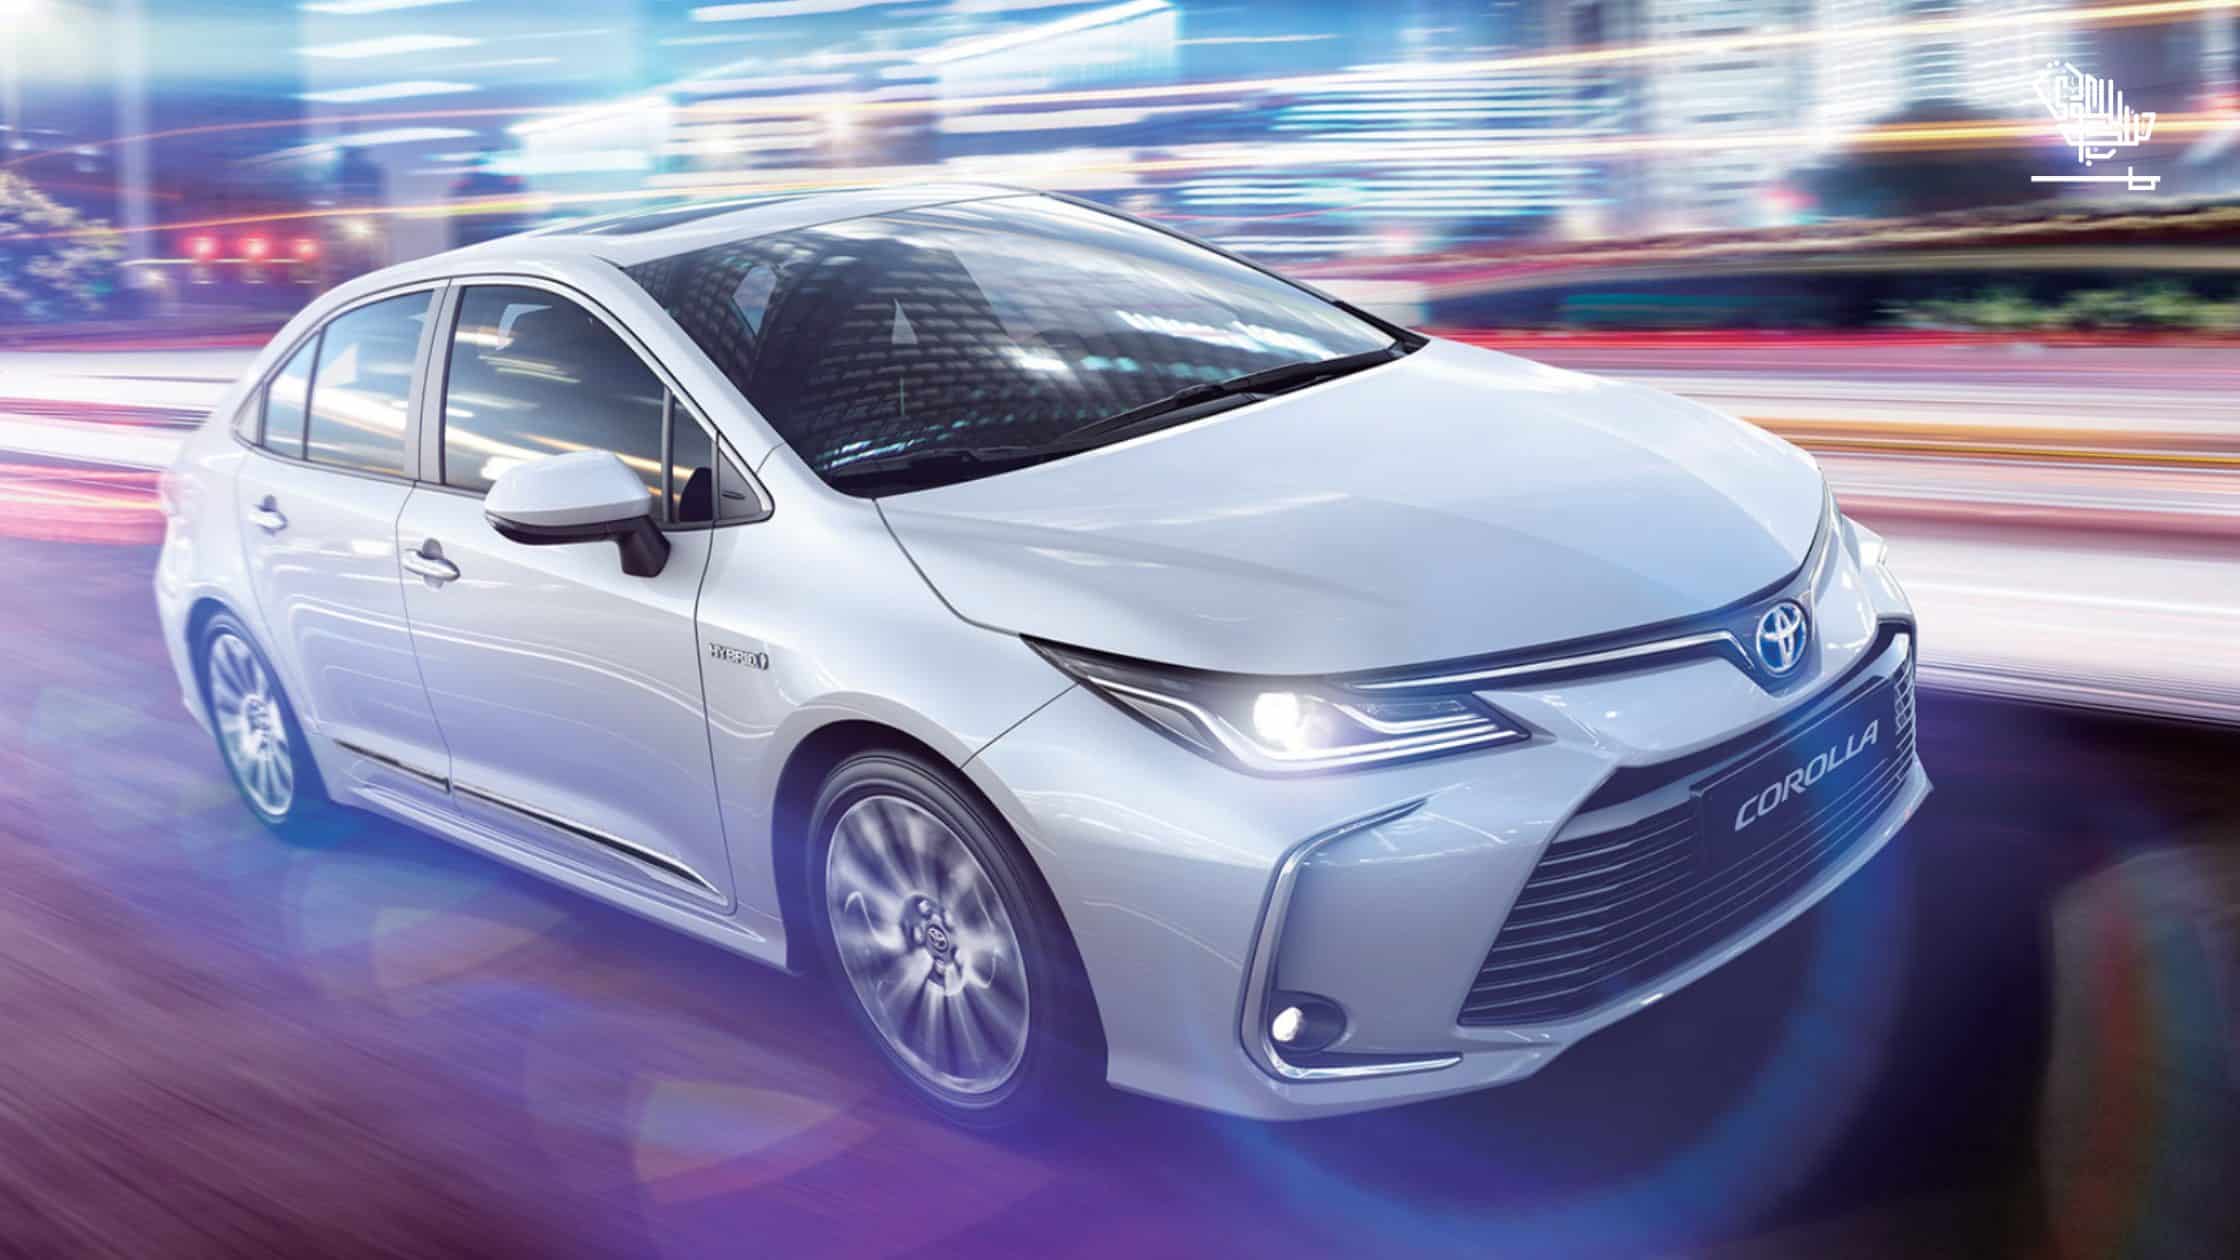 In ksa 2021 price yaris Prices and